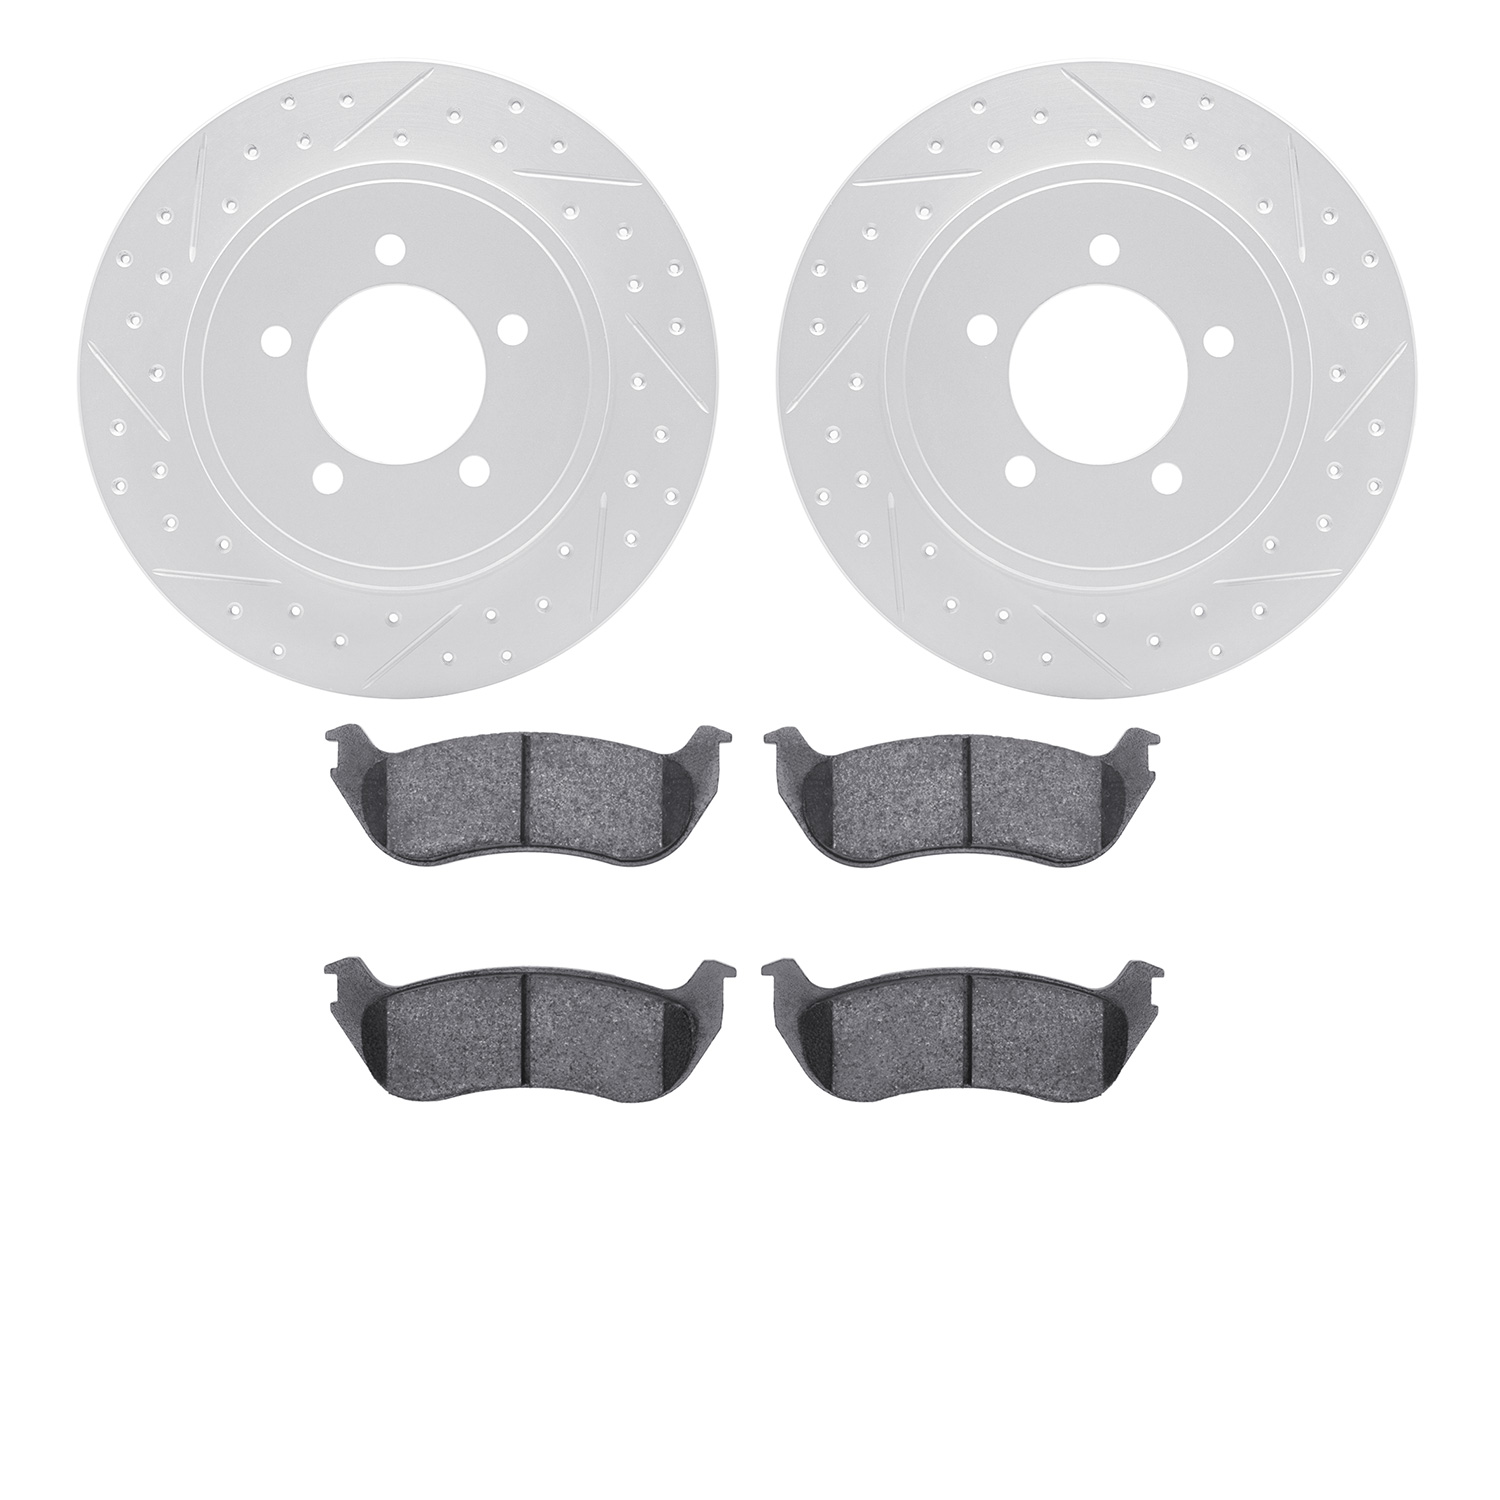 2202-54006 Geoperformance Drilled/Slotted Rotors w/Heavy-Duty Pads Kit, 2002-2005 Ford/Lincoln/Mercury/Mazda, Position: Rear